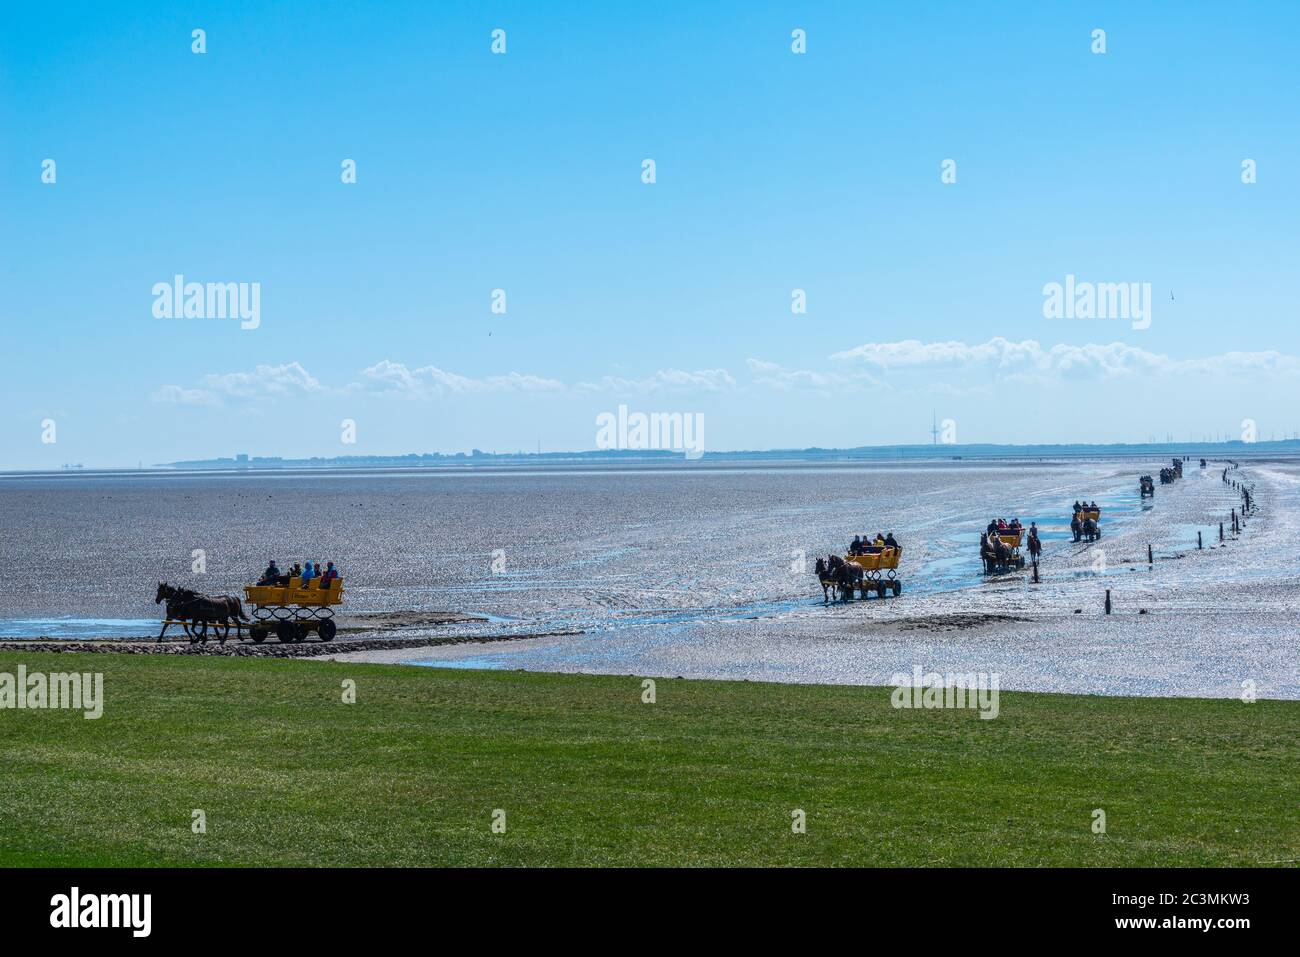 Horse-drawn carriages take tourists from the mainland to the North Sea island of Neuwerk, Federal State Hamburg, North Germany, UNESCO World heritage, Stock Photo